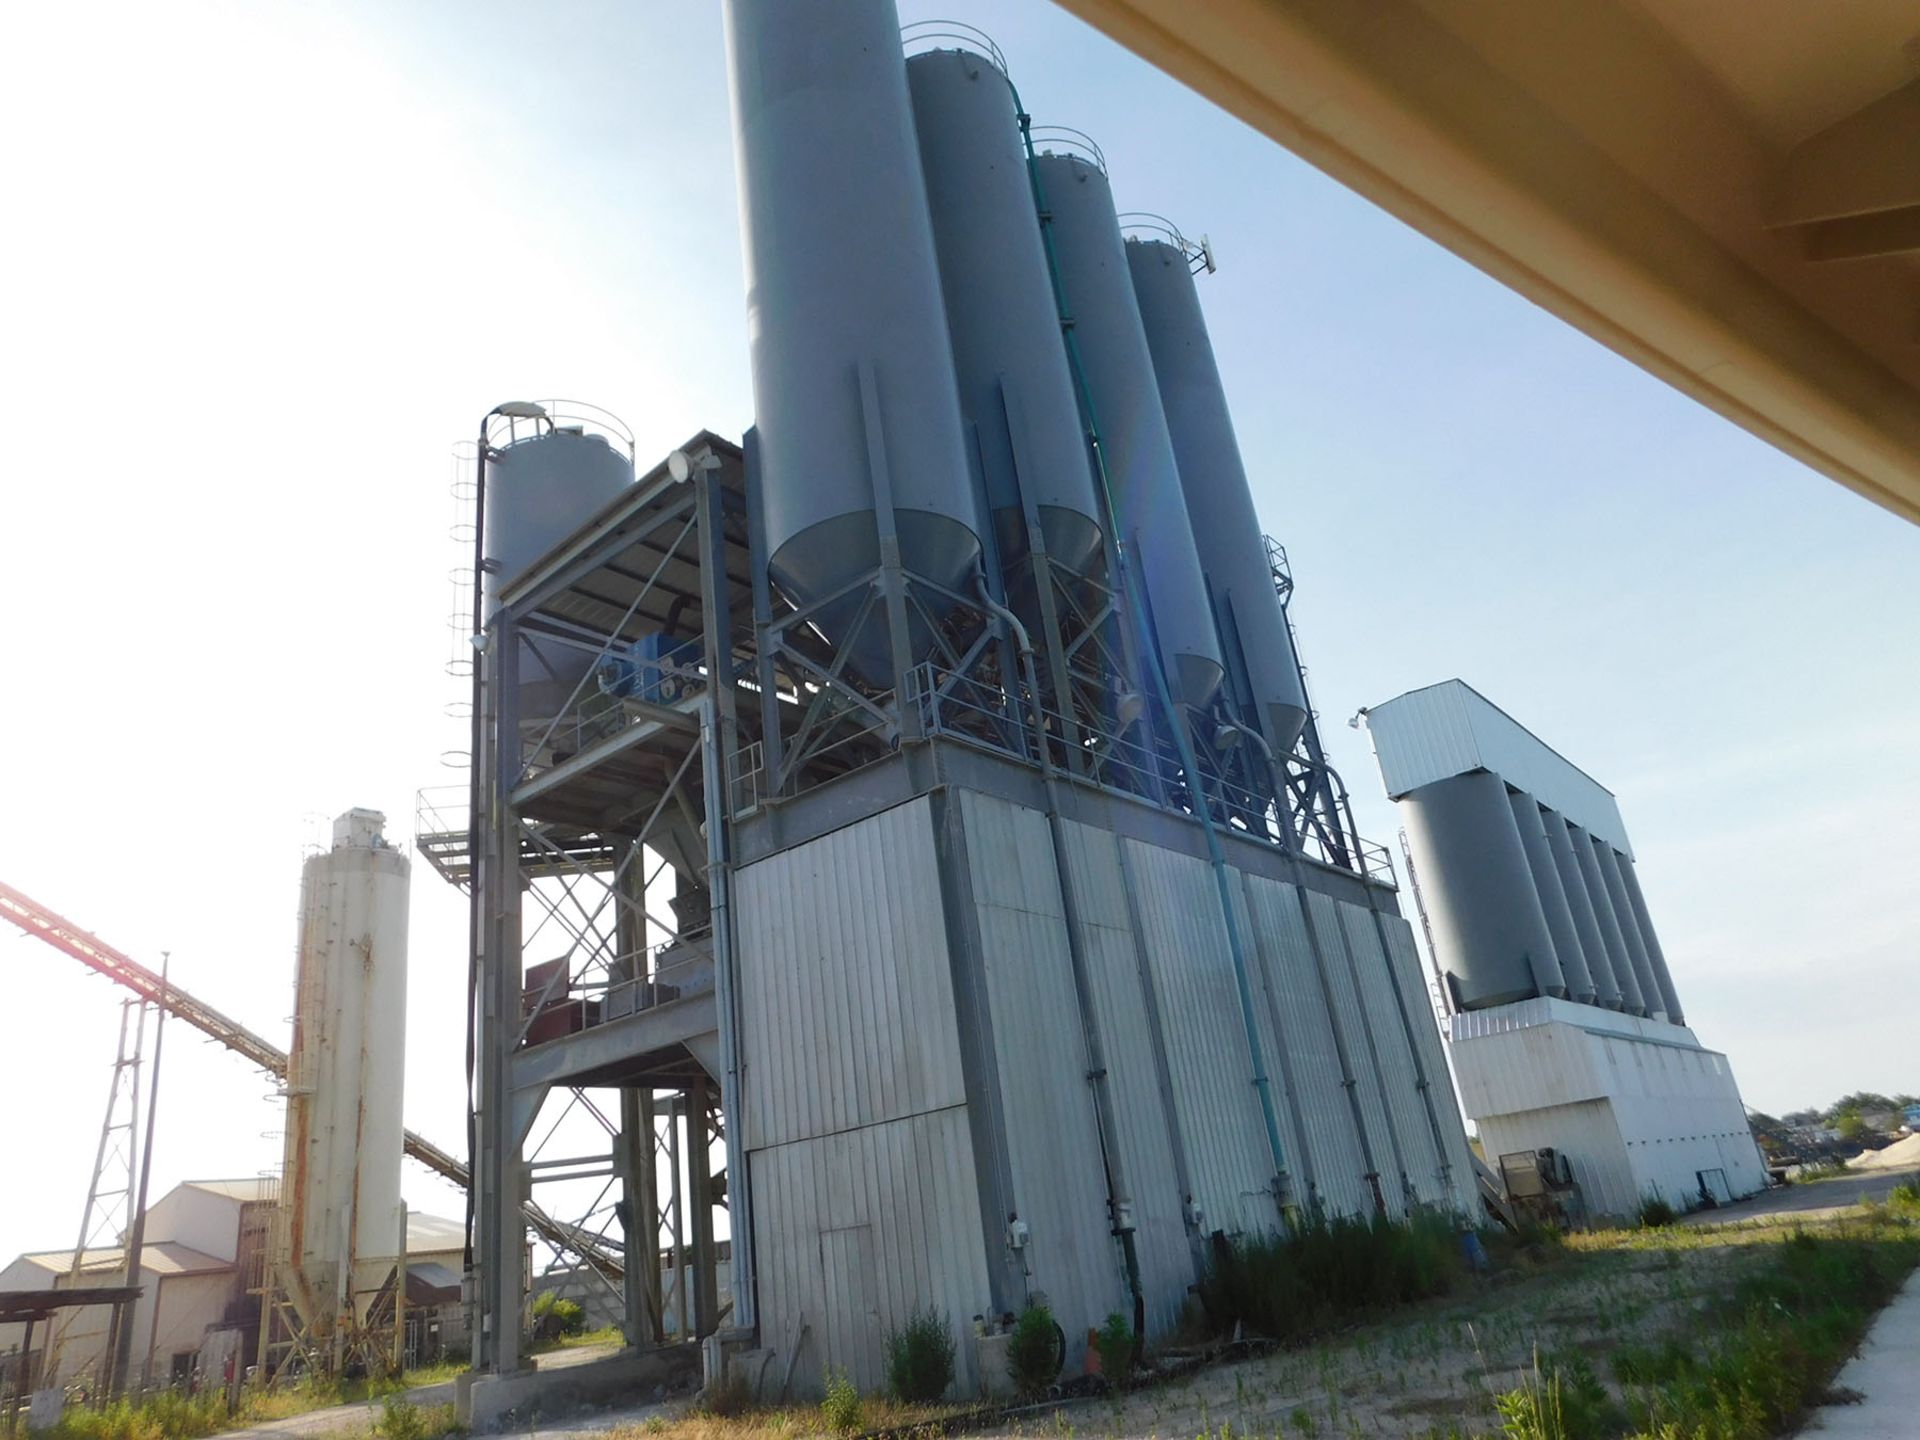 COMBINATION OF LOTS 2286 THRU 2290 - 2008 STANDLEY CONCRETE BATCH PLANT - Image 2 of 5